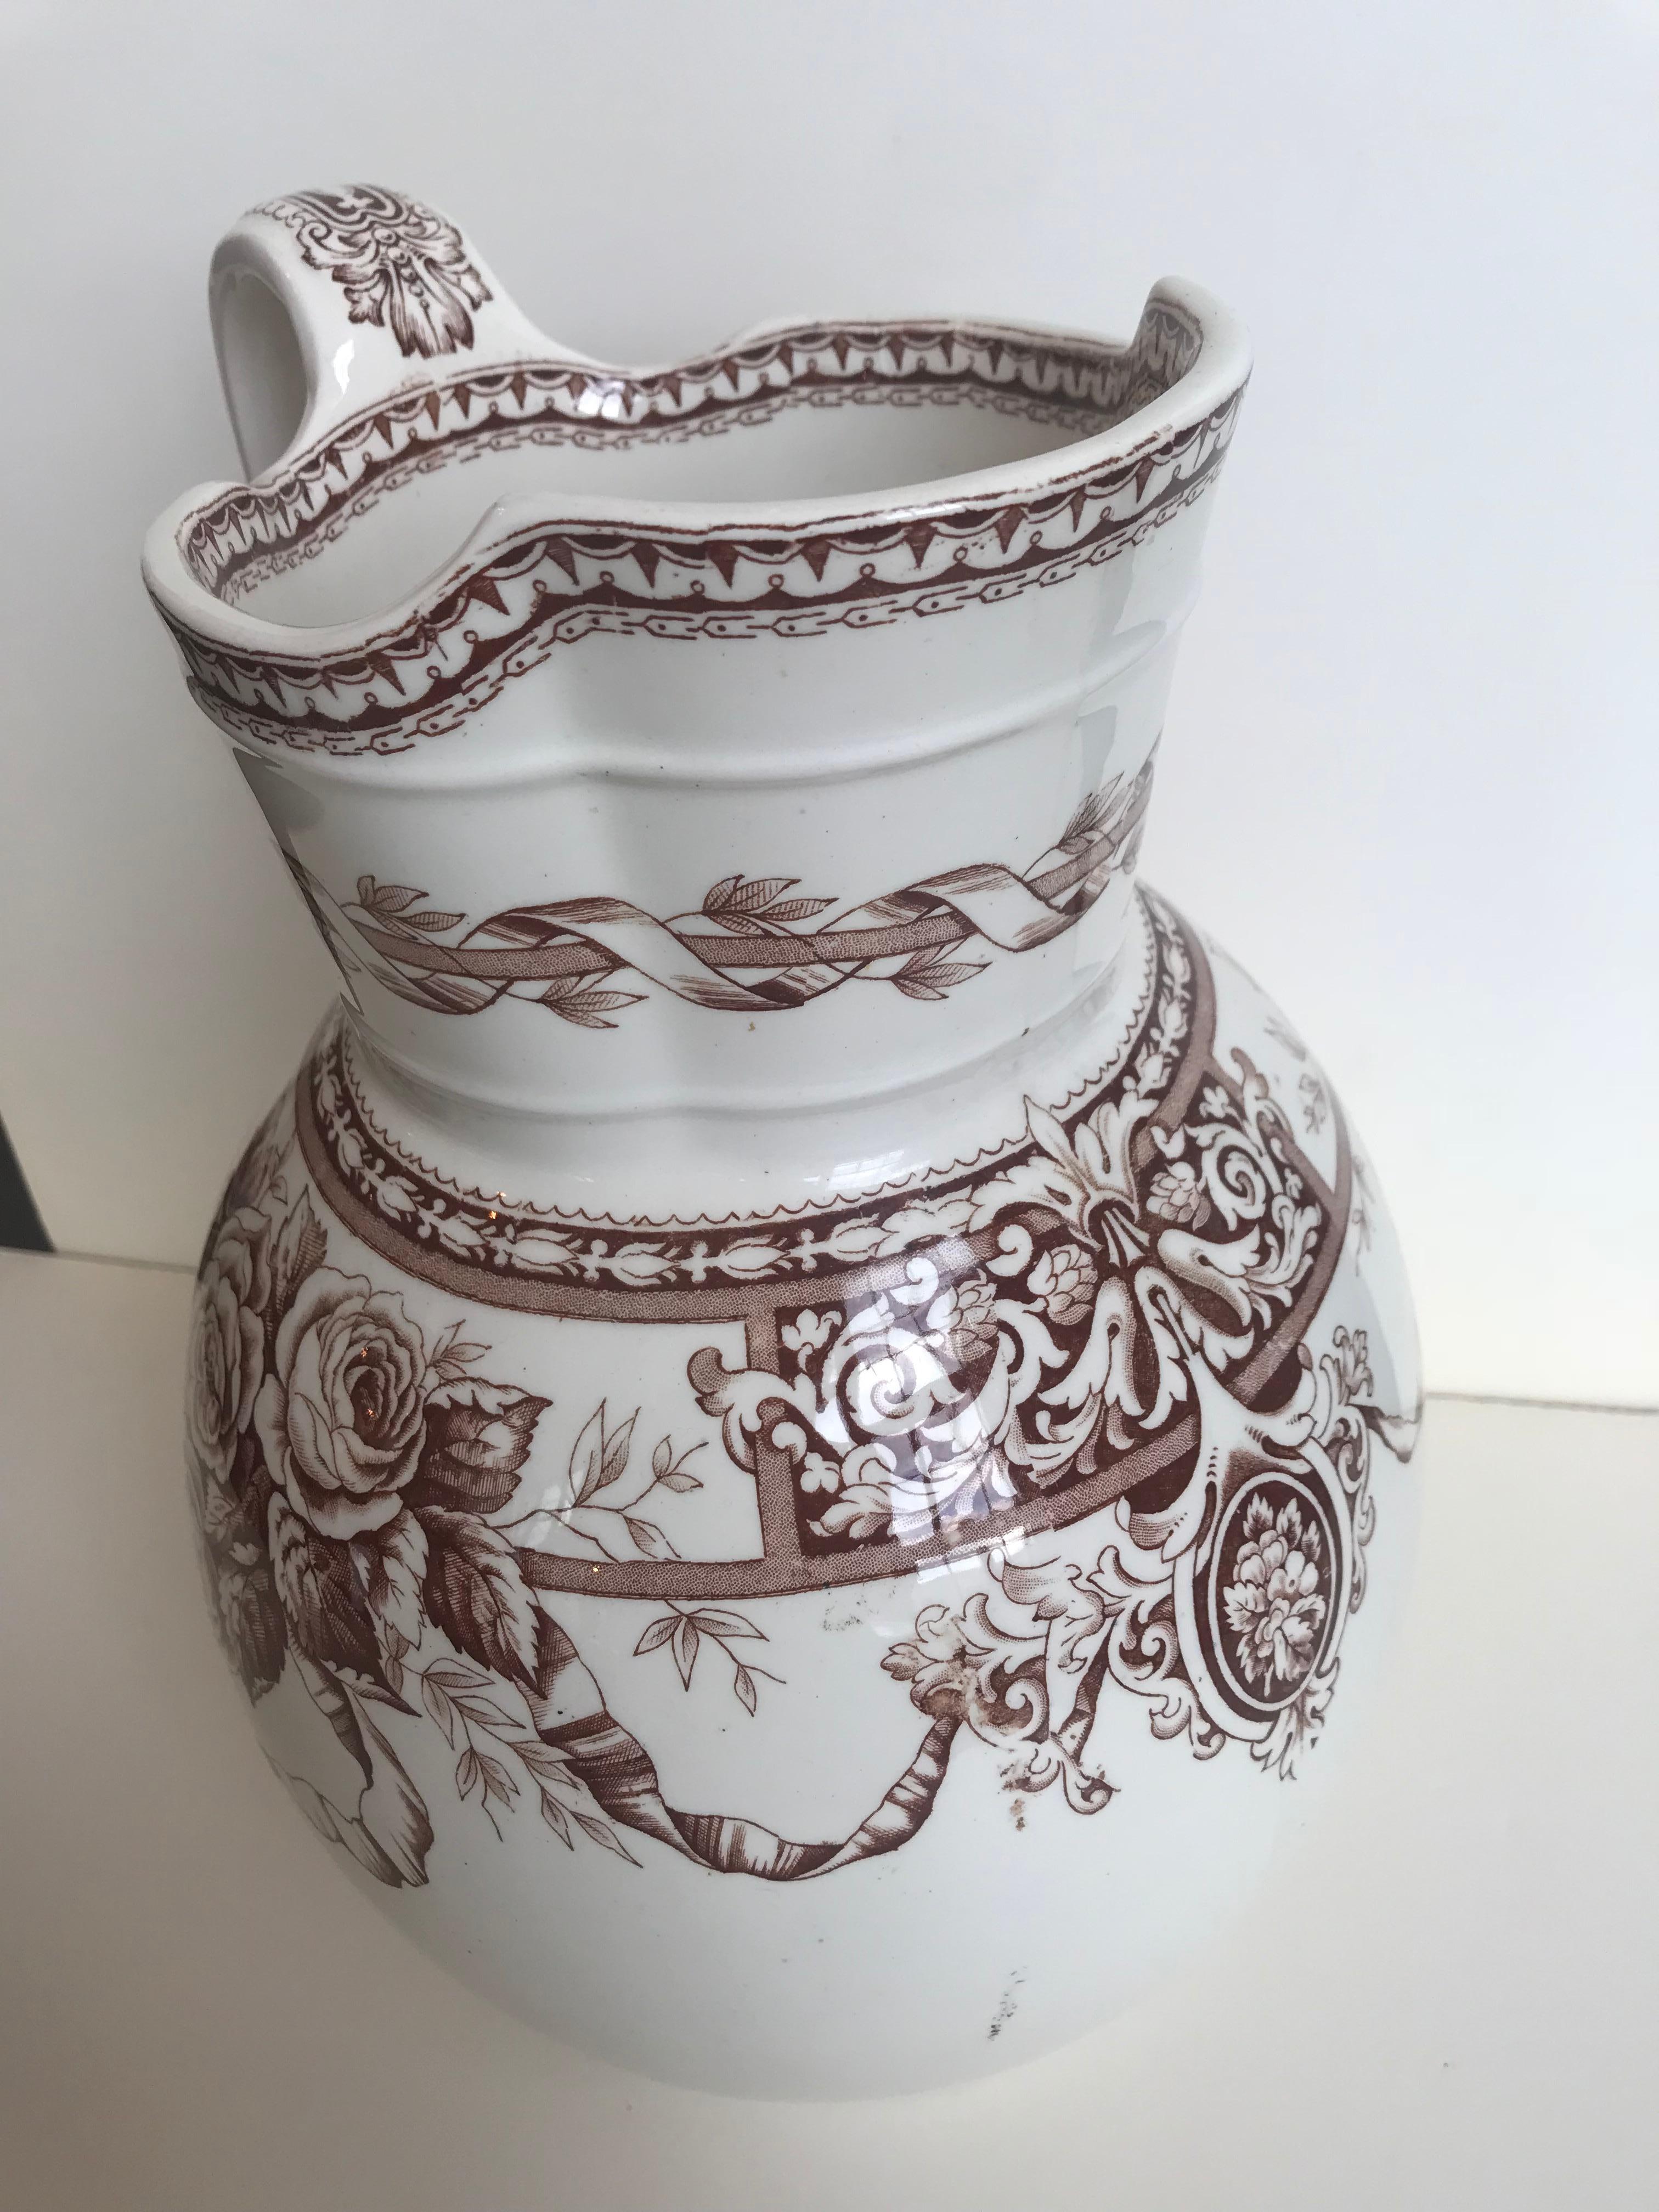 19th century large scale floral ribbon English ironstone pitcher. Marked T. Furnival & Sons, Sharon. 

 